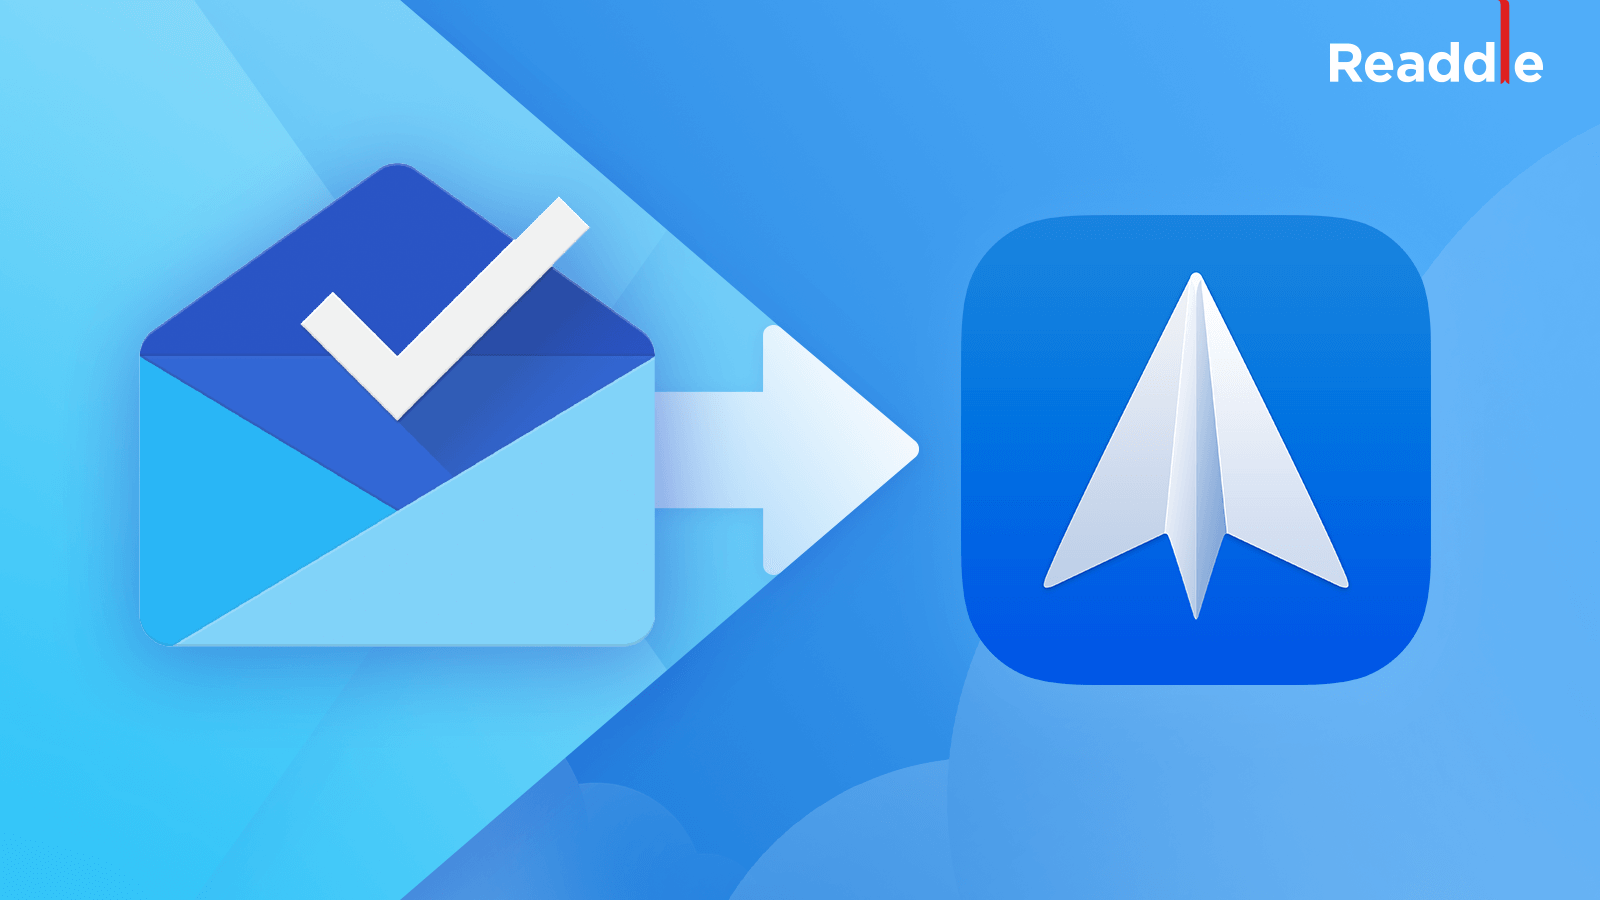 spark email app for mac